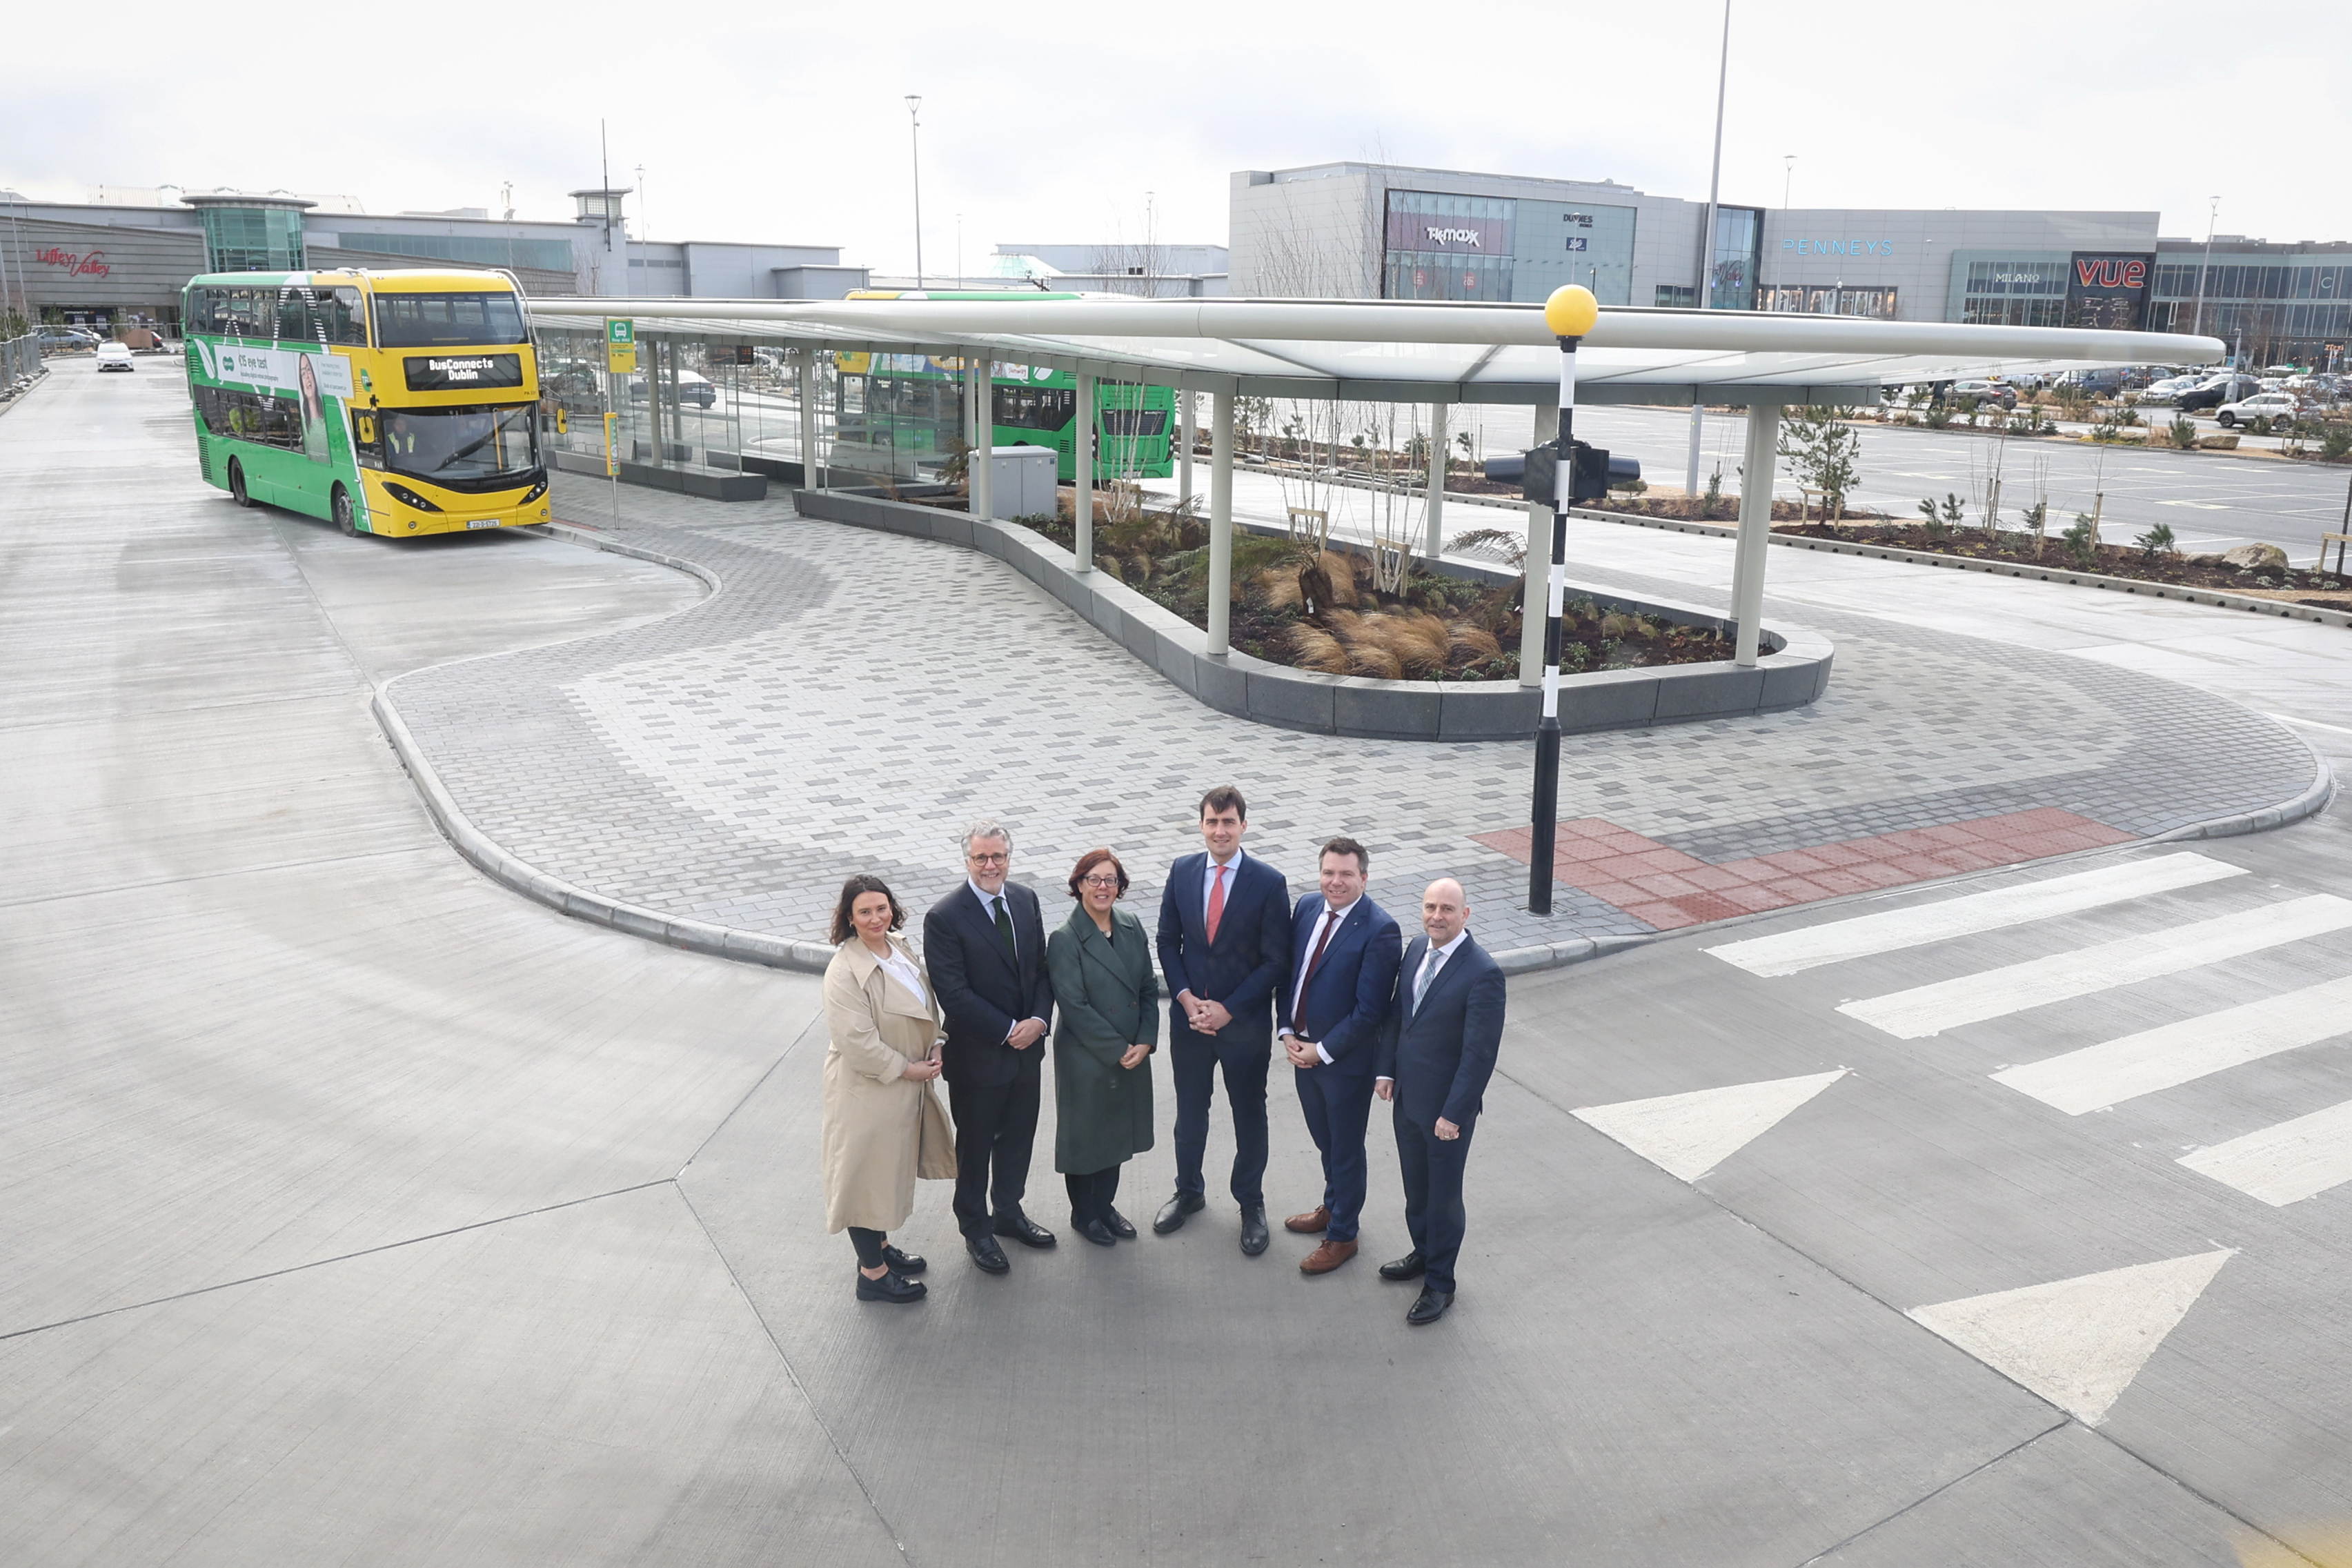 Launch of Liffey Valley Bus Plaza